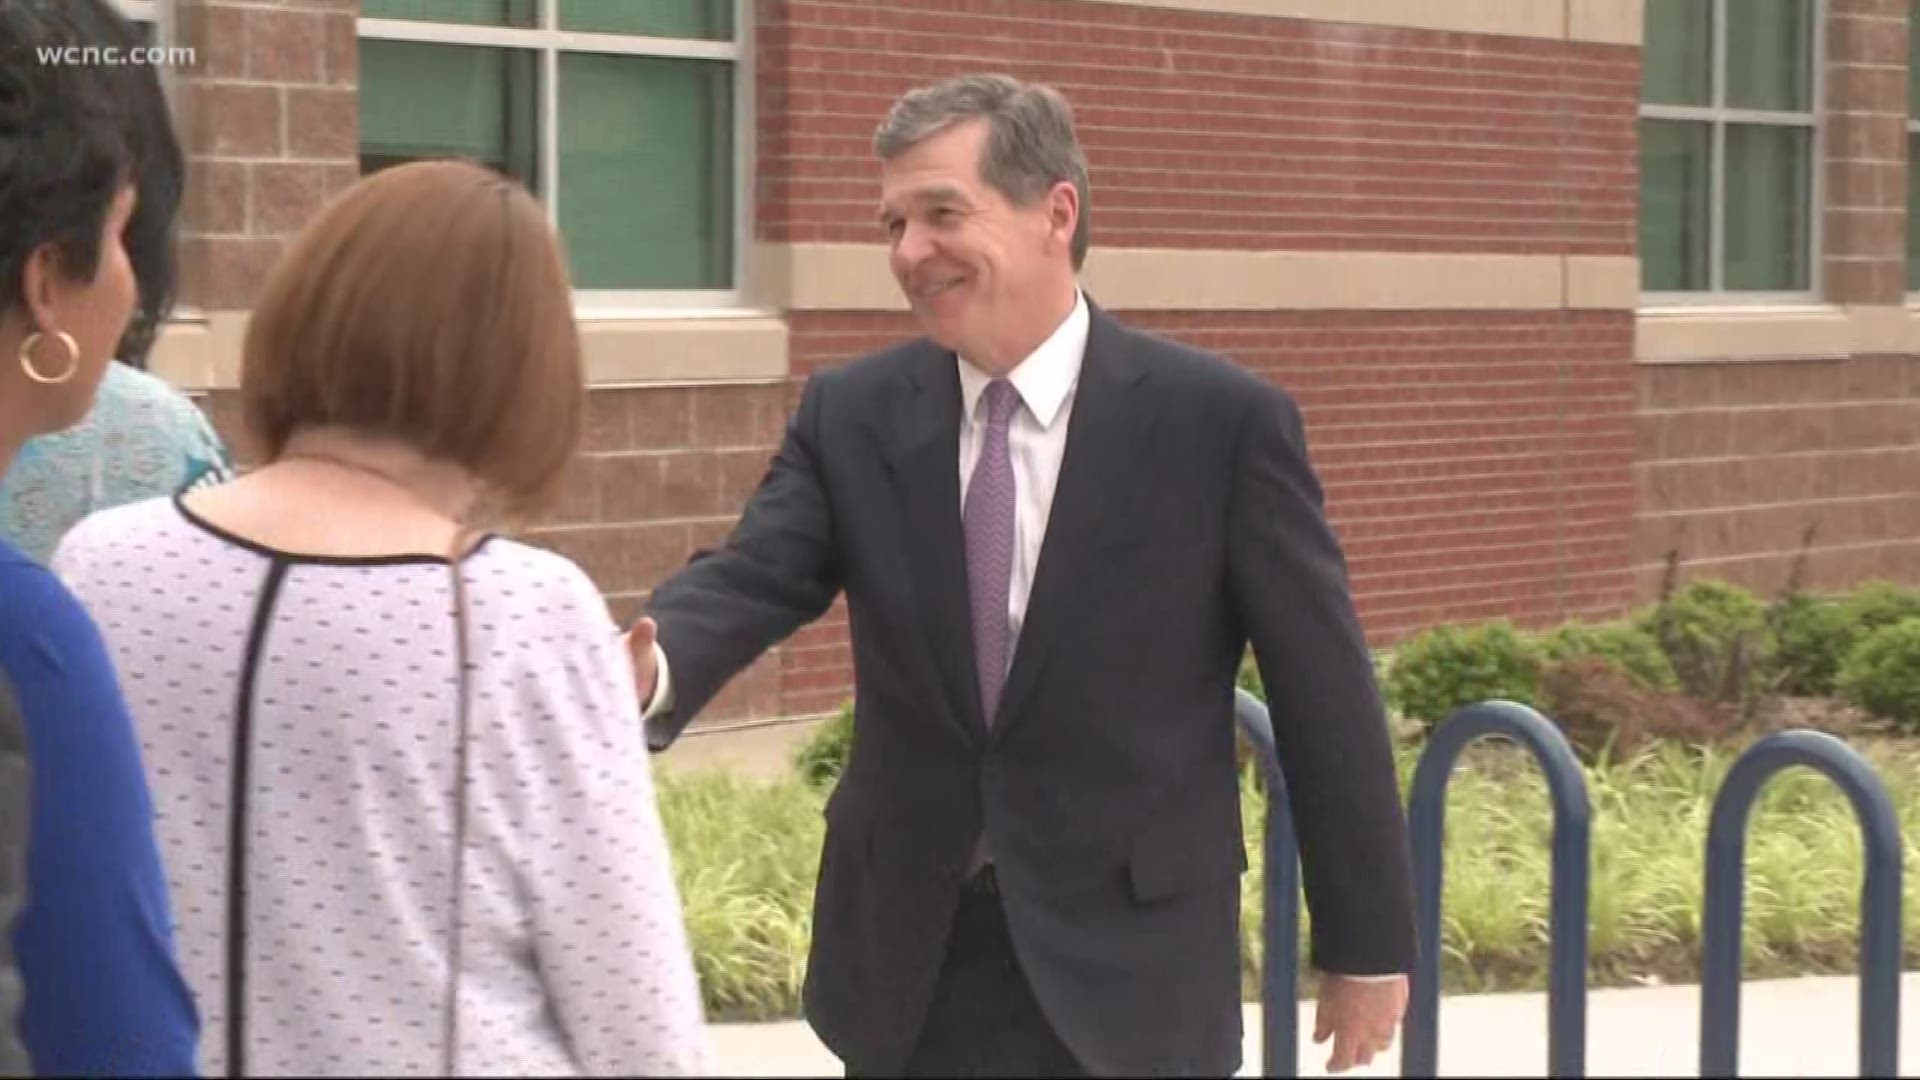 The Republican proposal totaled $35 million; Roy Cooper's plan involves $130 million for schools and school safety.